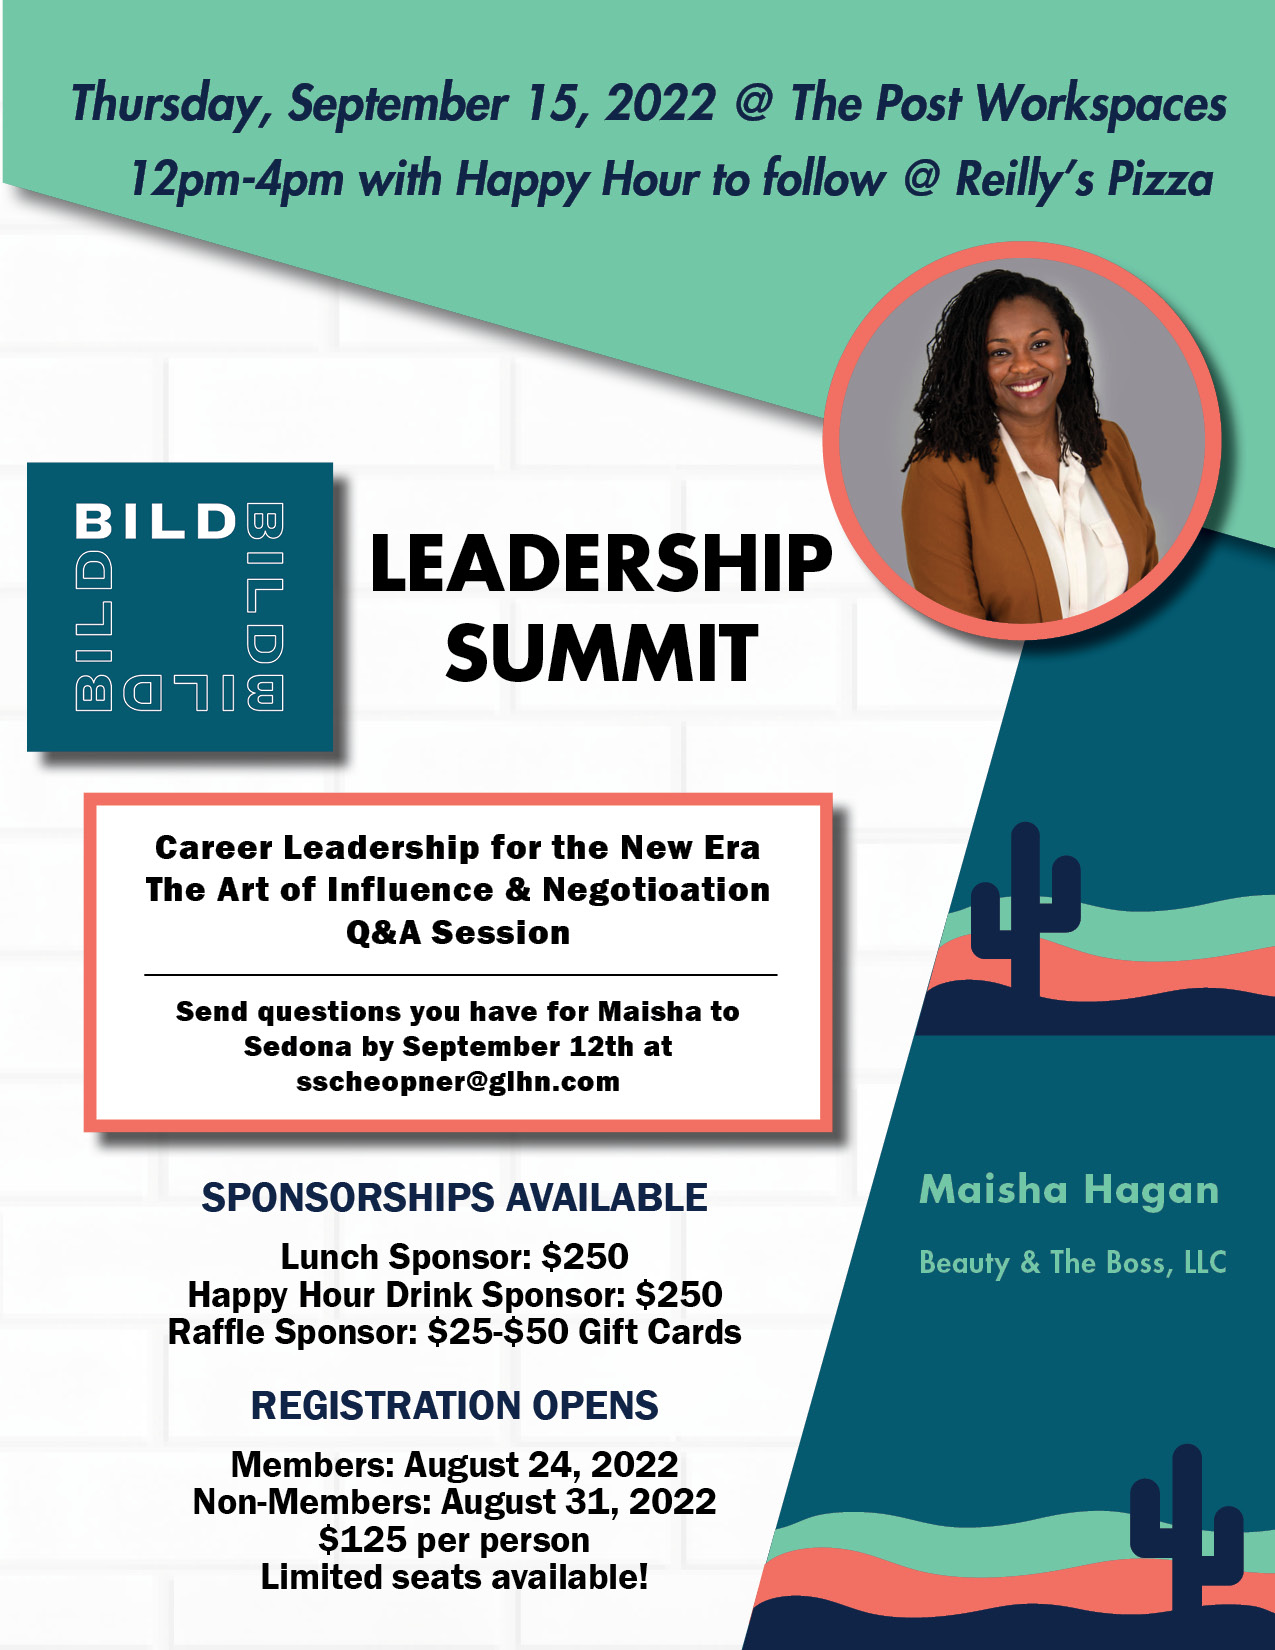 Registration is now open for this year’s Leadership Summit!